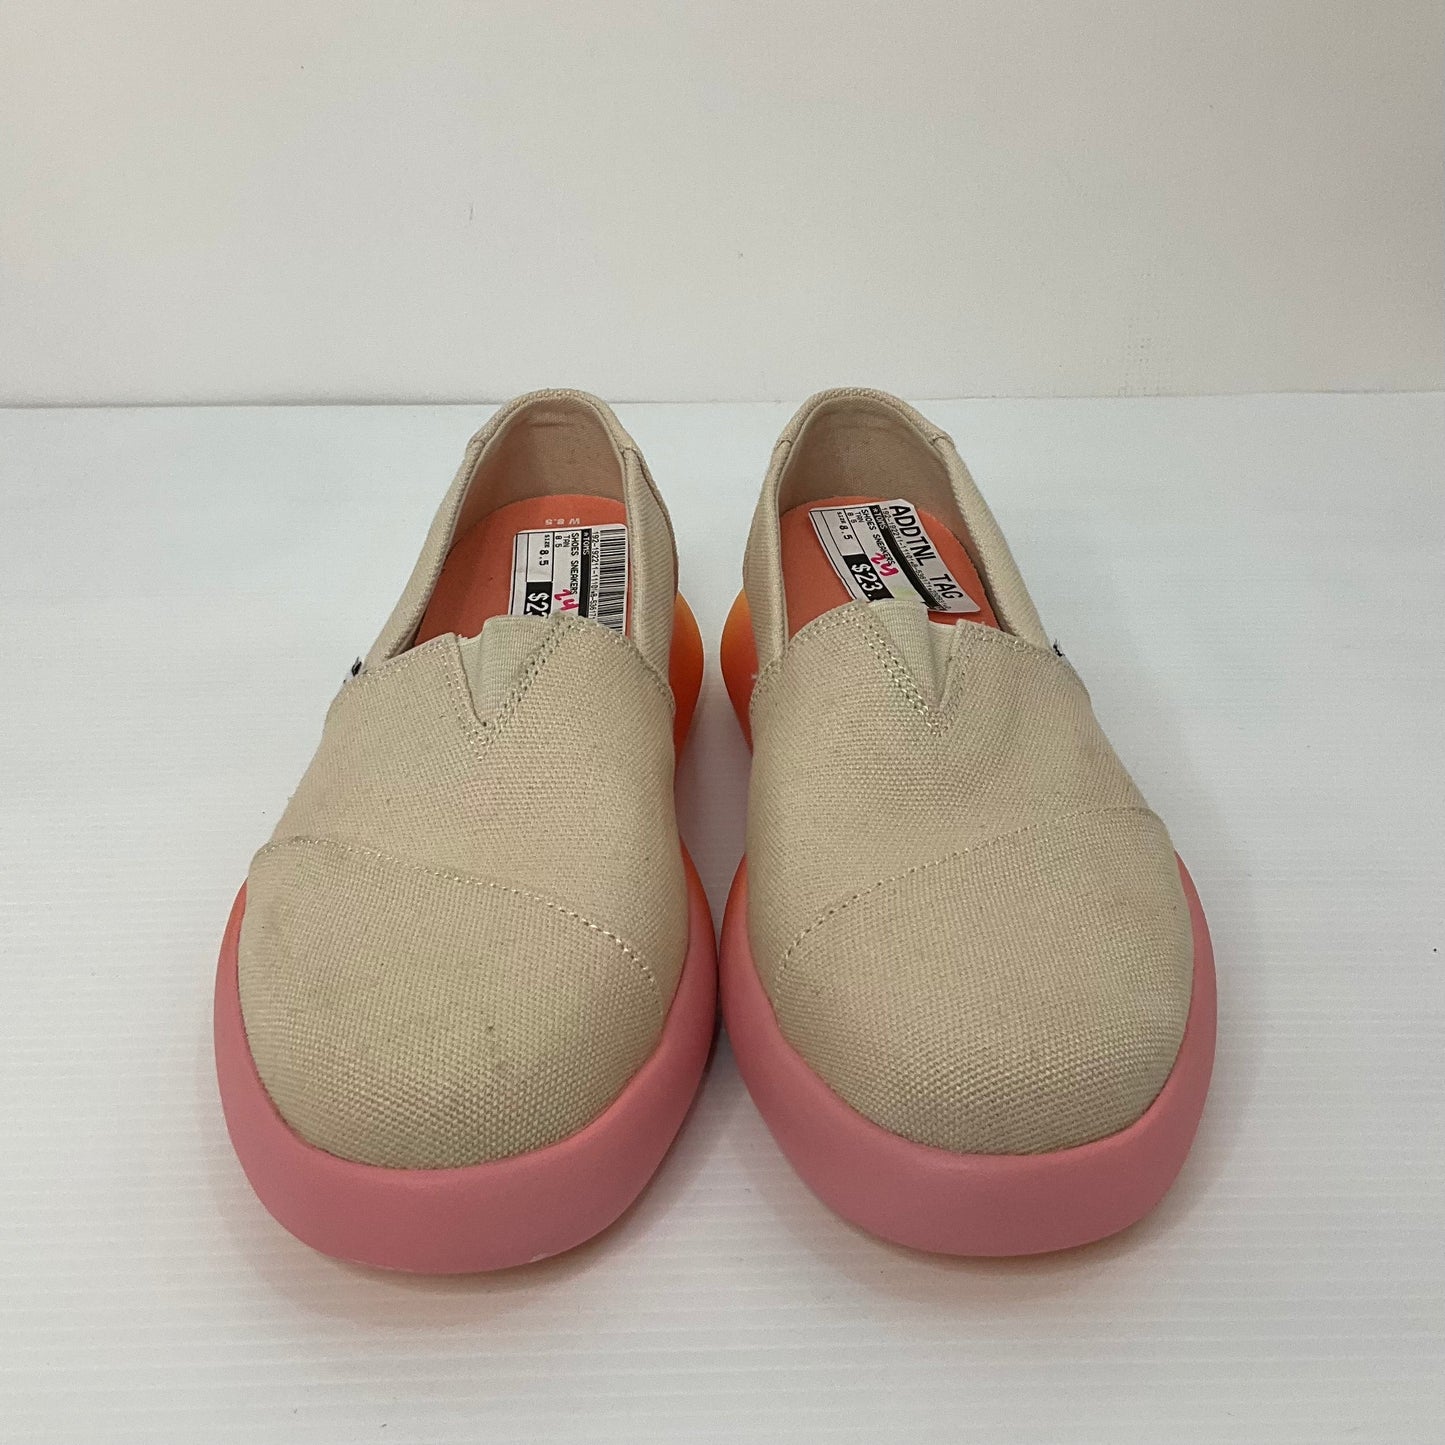 Tan Shoes Sneakers Toms, Size 8.5